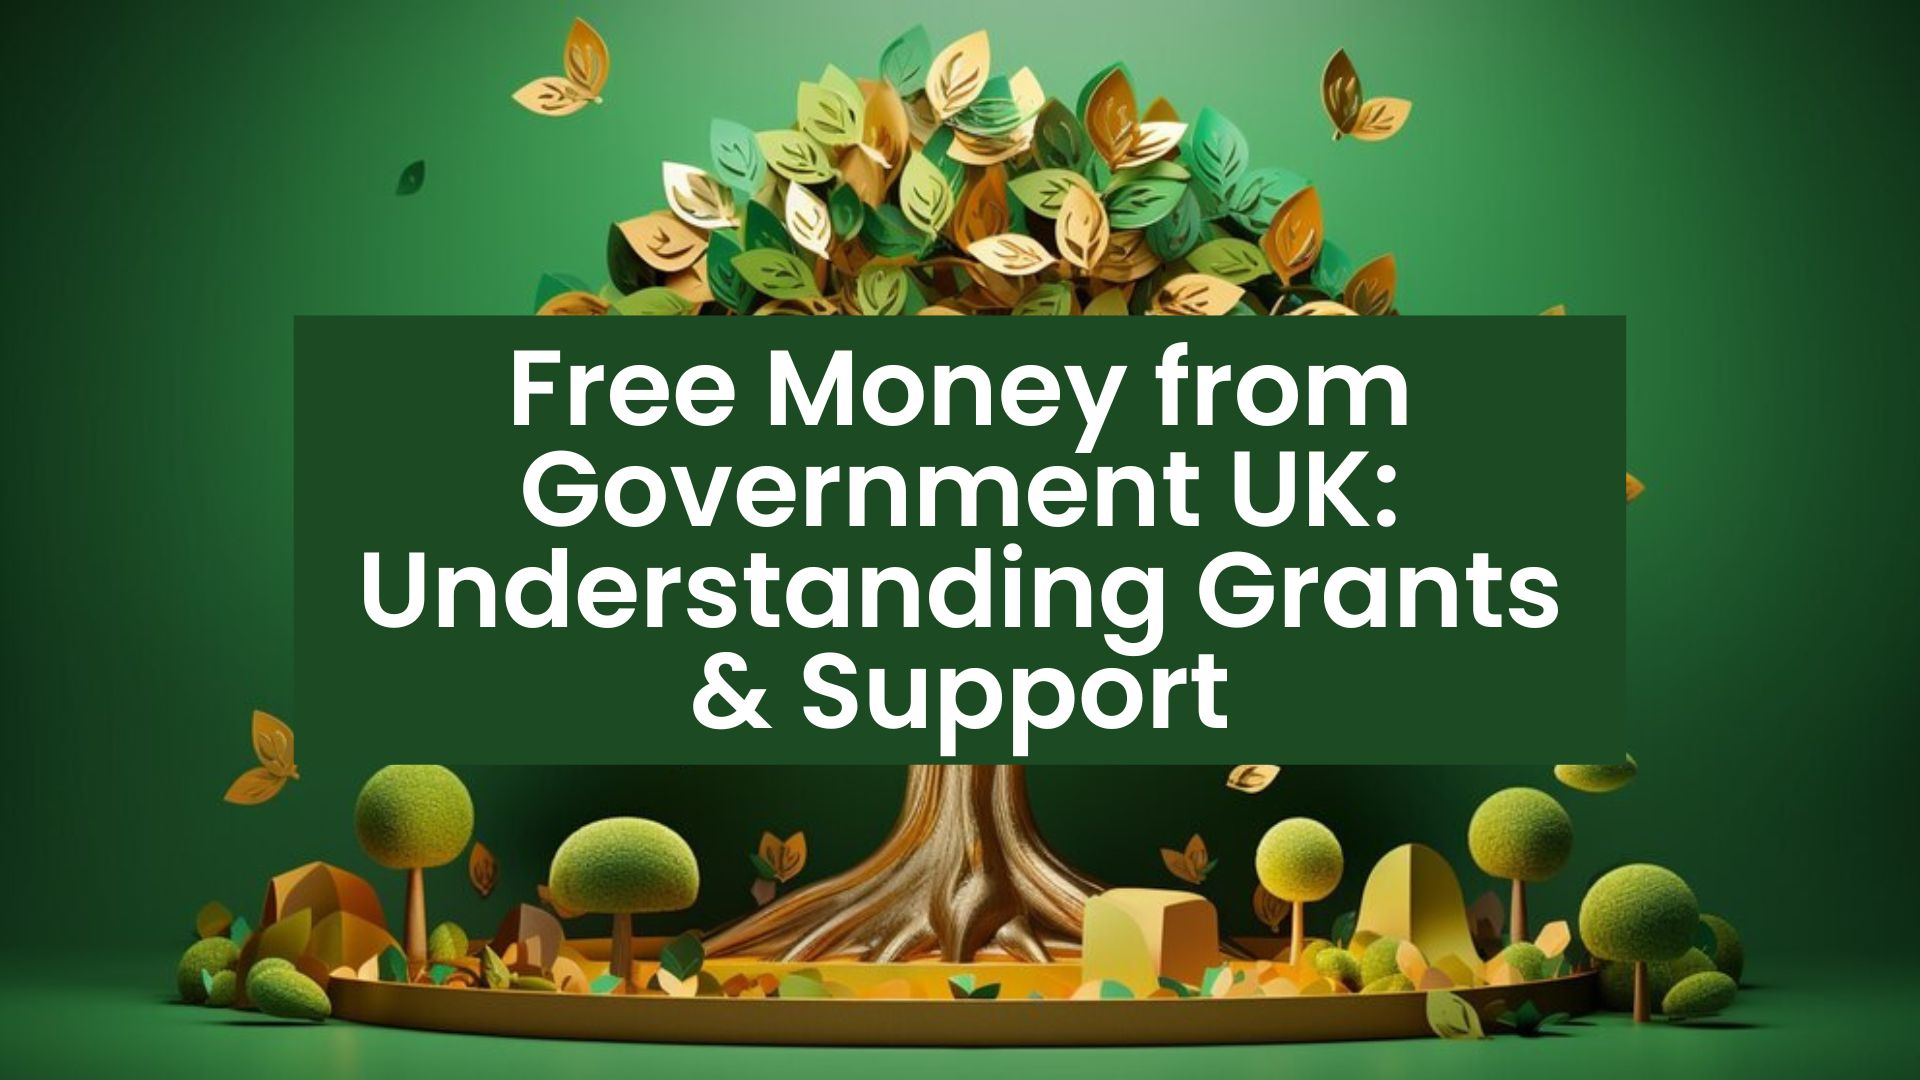 Free money from Government UK